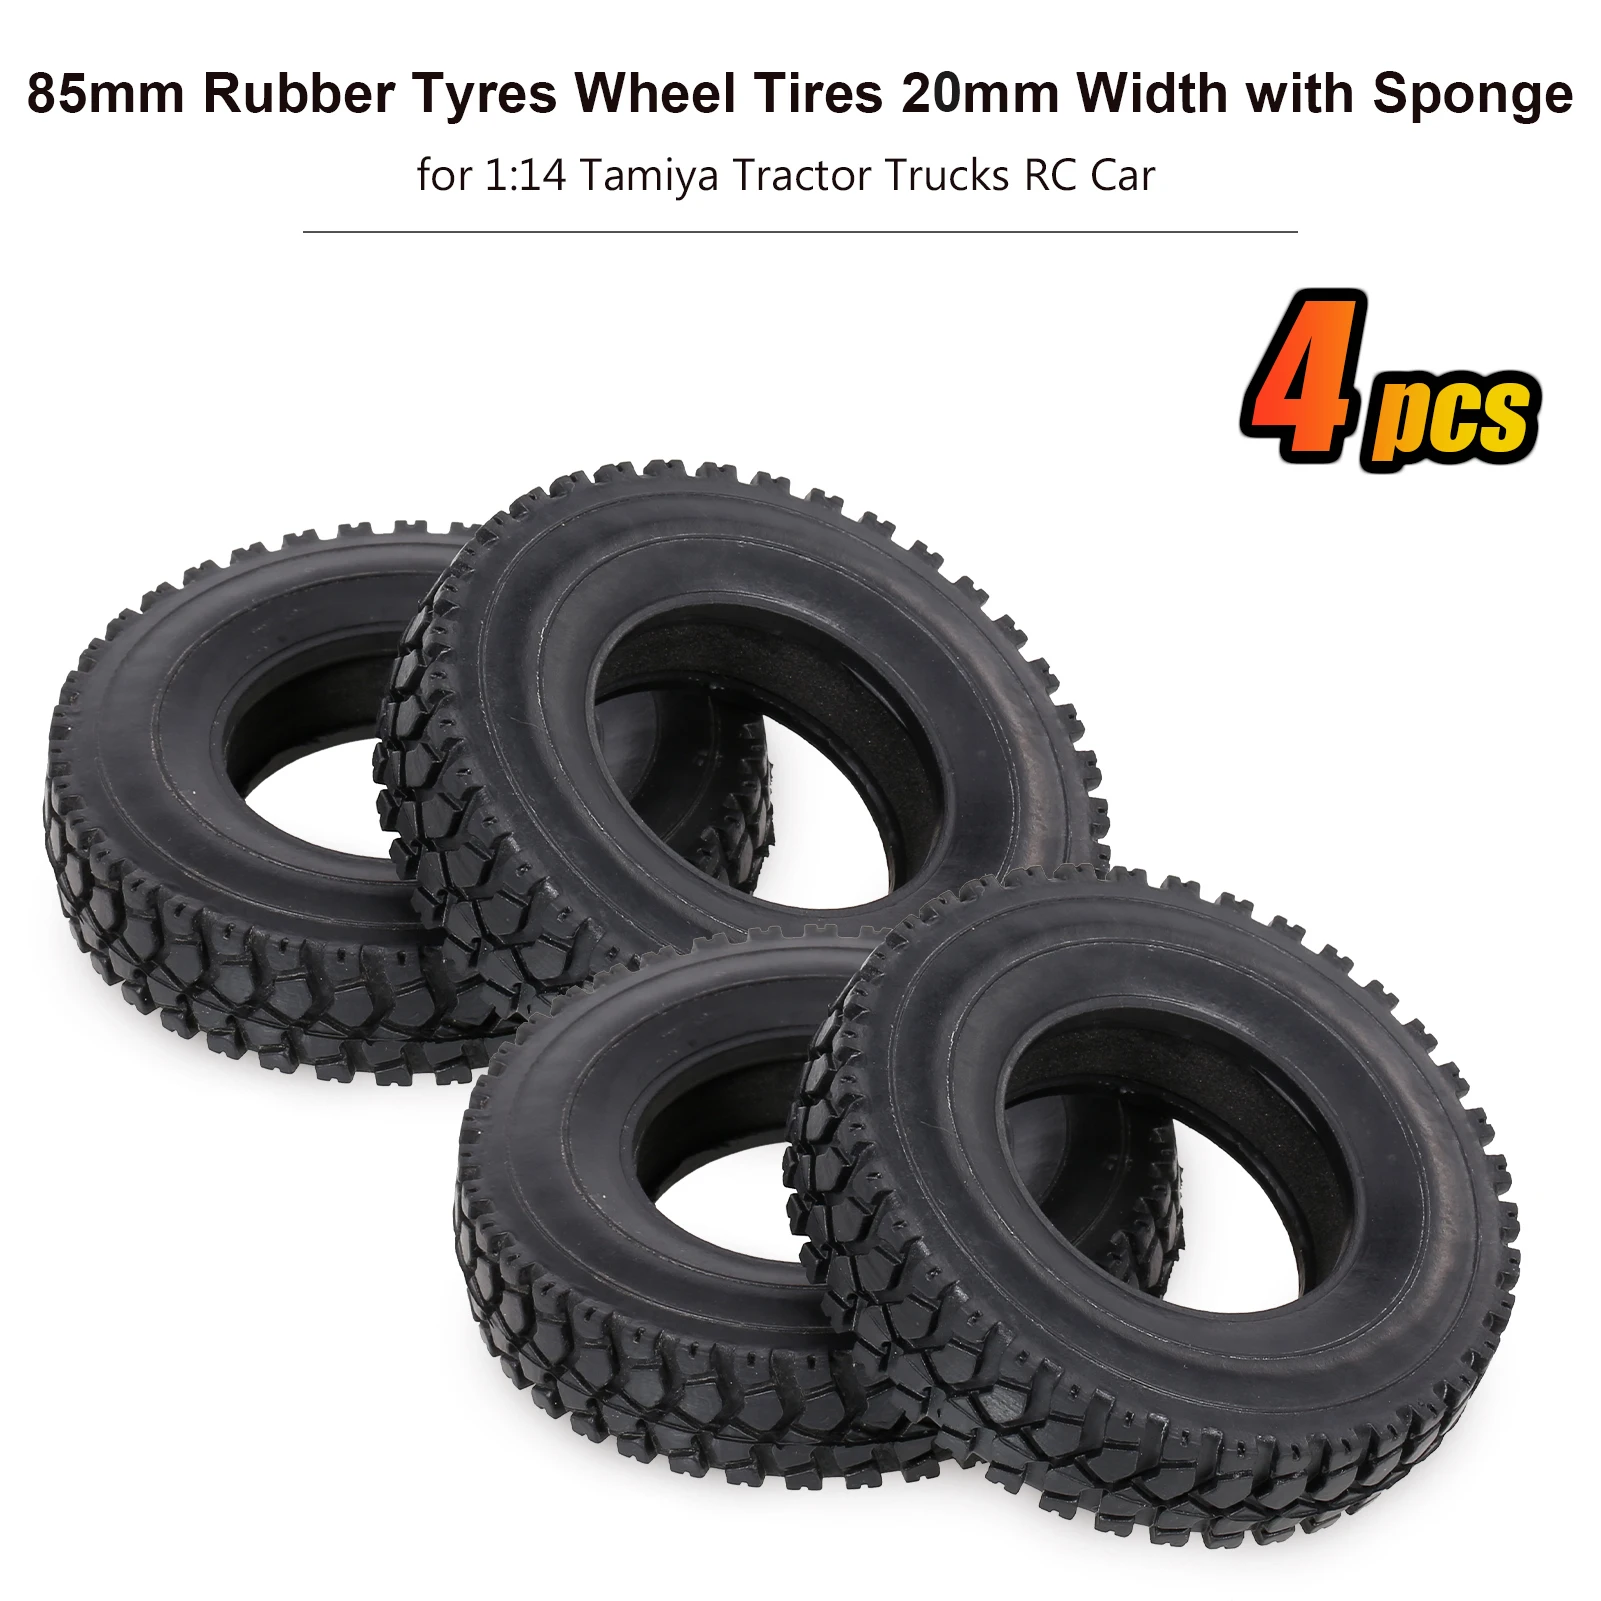 4pc 1:14 RC Tamiya Tractor Short Course Truck Car Climbing Rubber Tyre Tires 